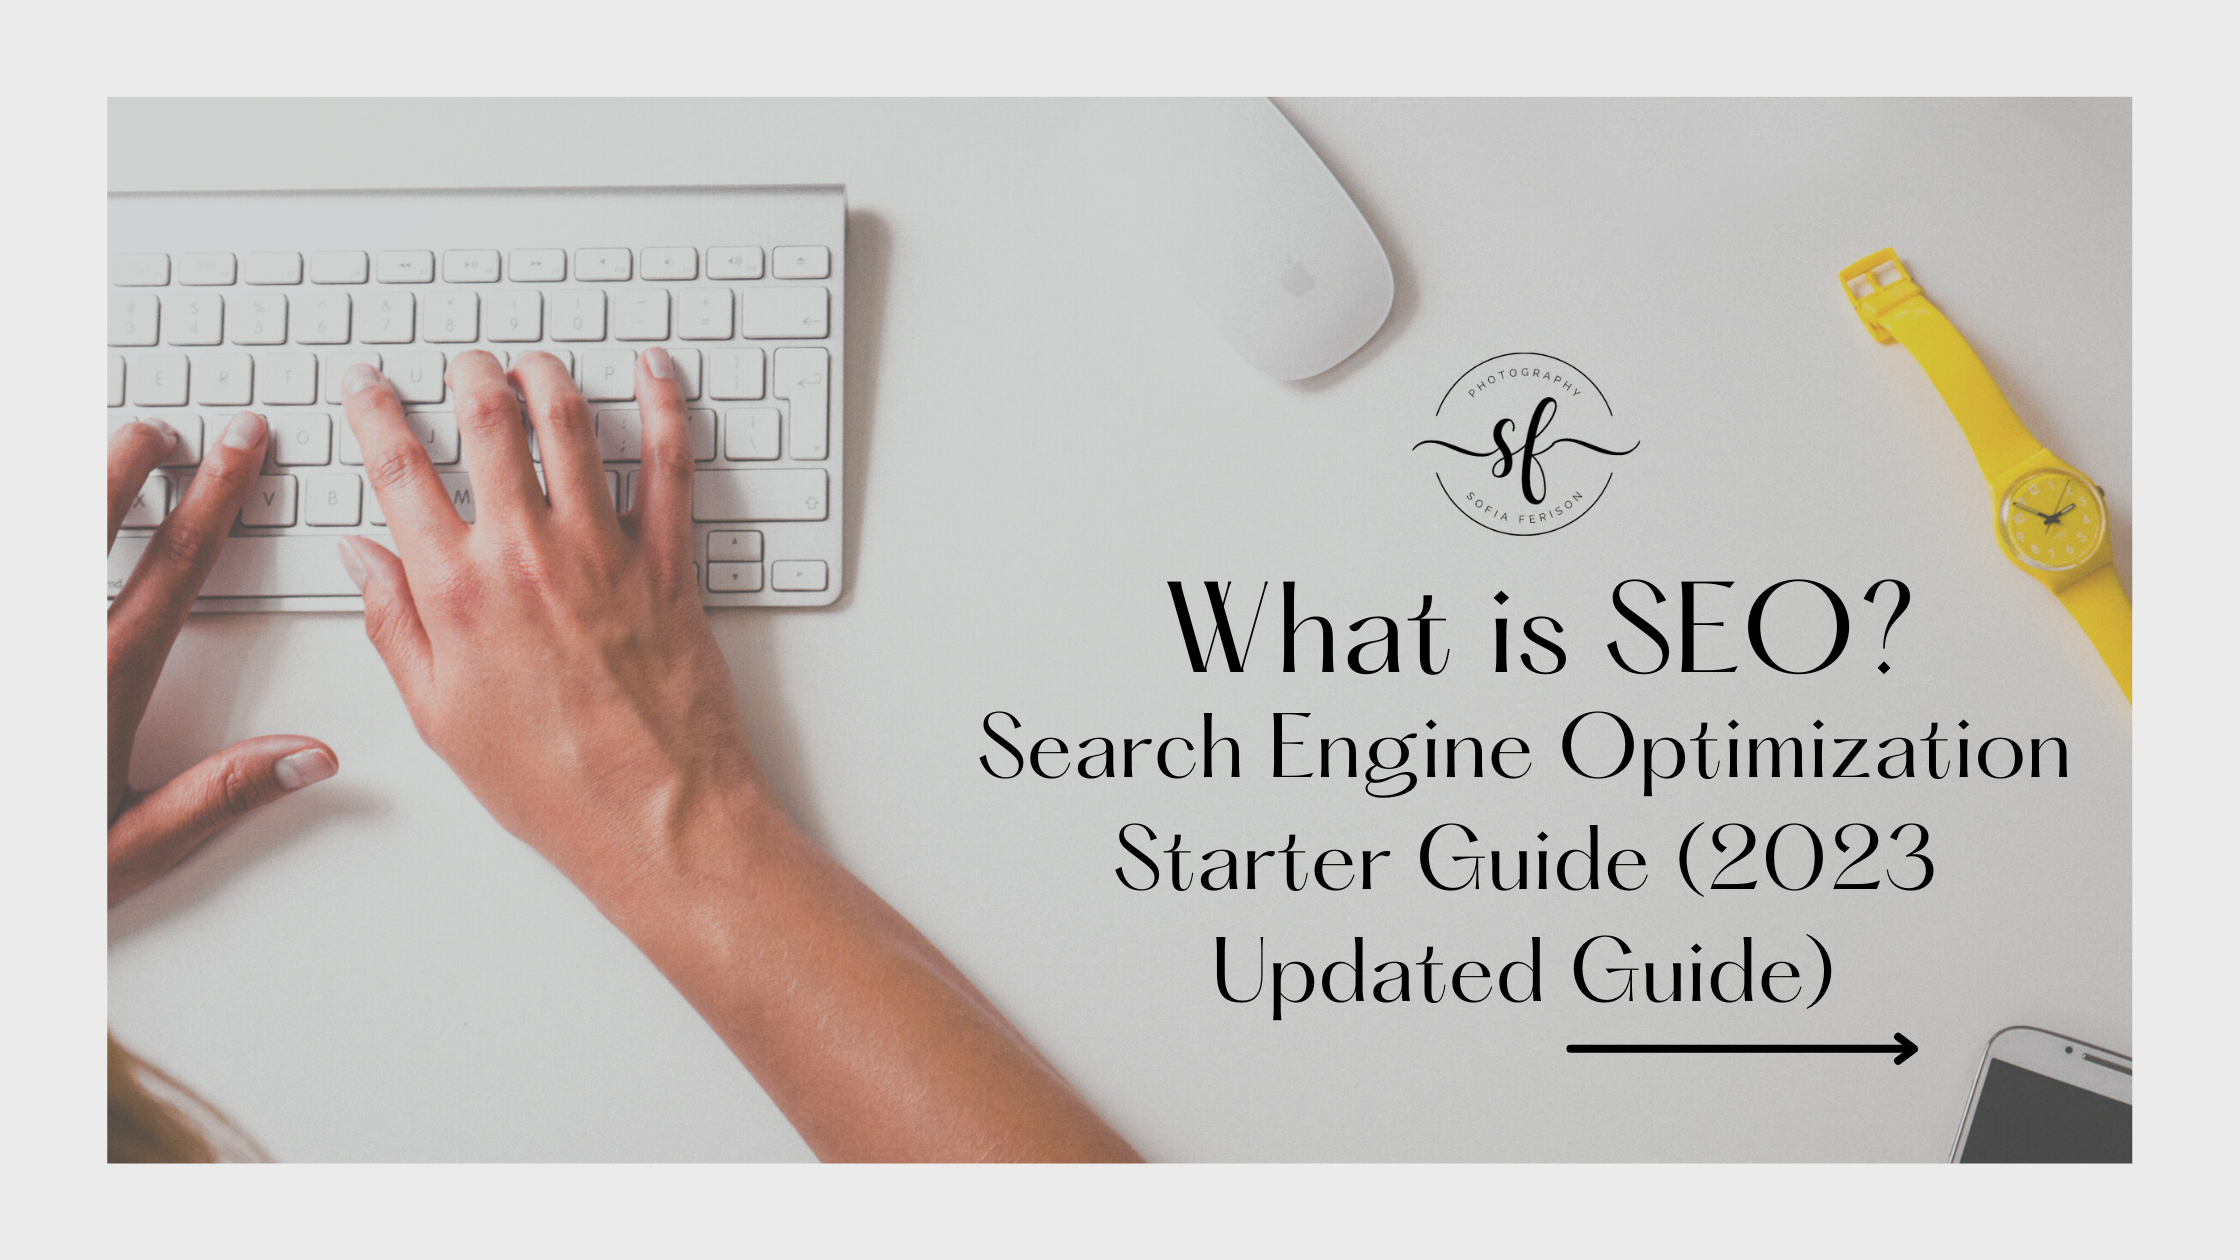 What is SEO? Search Engine Optimization Starter Guide (2023 Updated Guide)